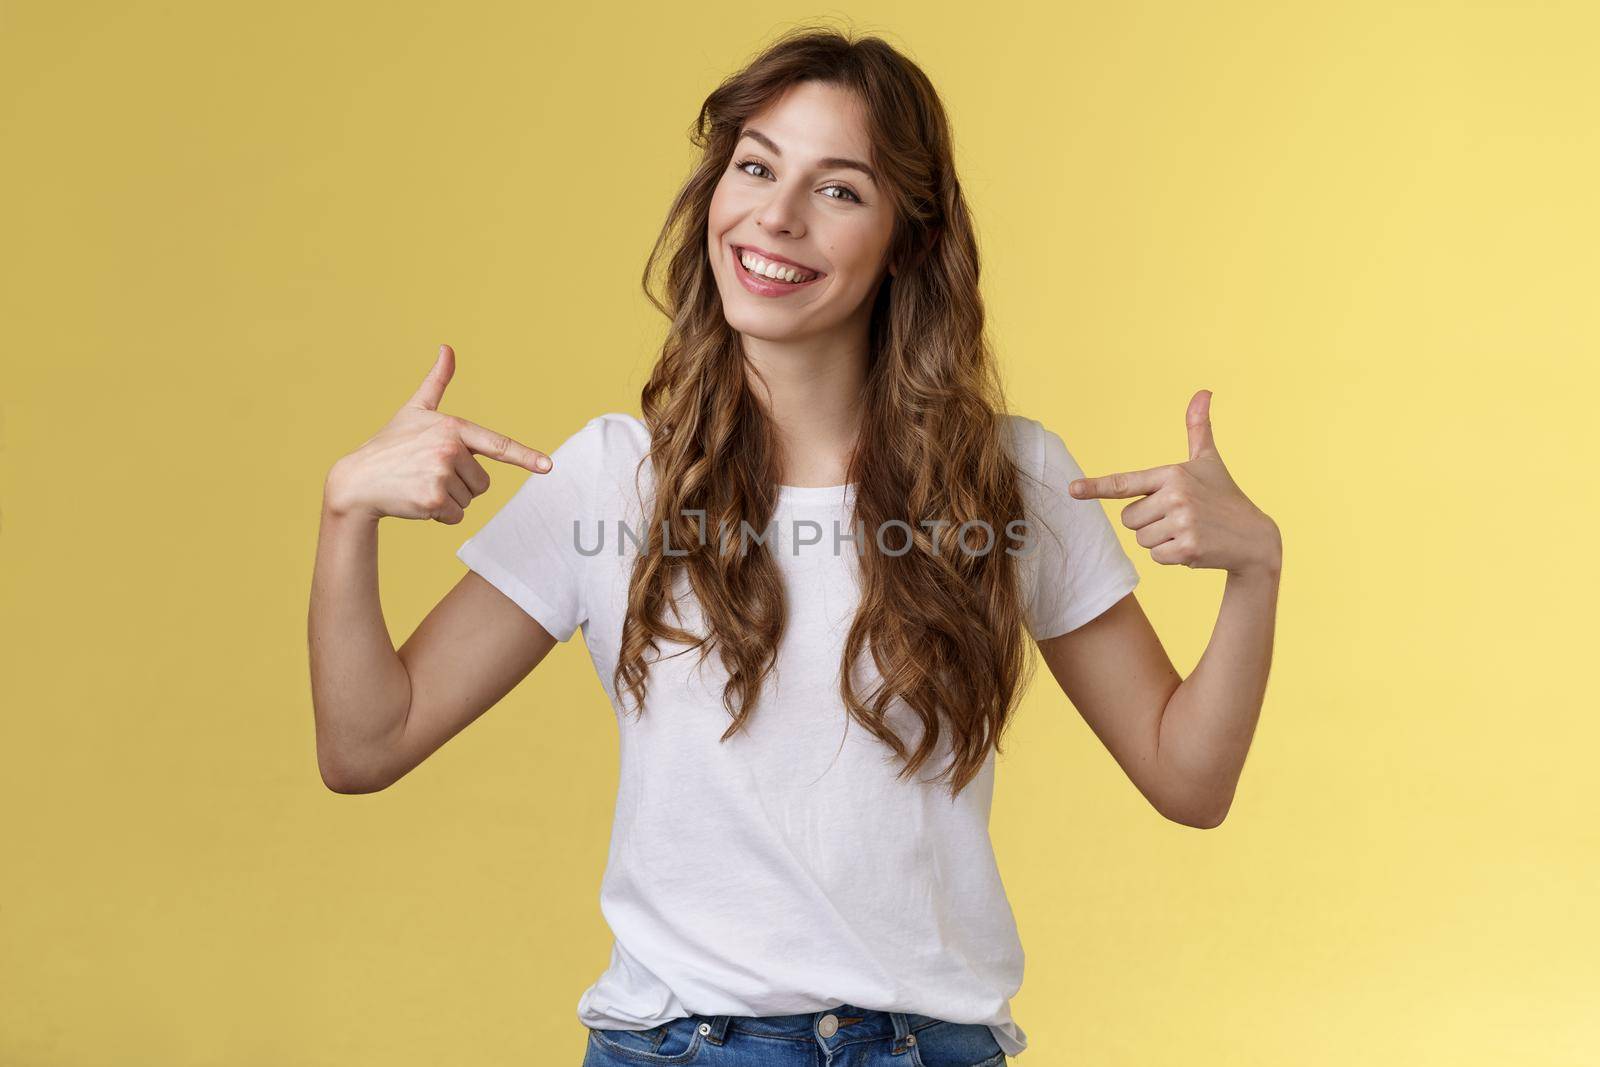 If you want professional its me. Sassy good-looking confident outgoing young woman introduce herself bragging own accomplishments pointing her chest smiling satisfied yellow background by Benzoix